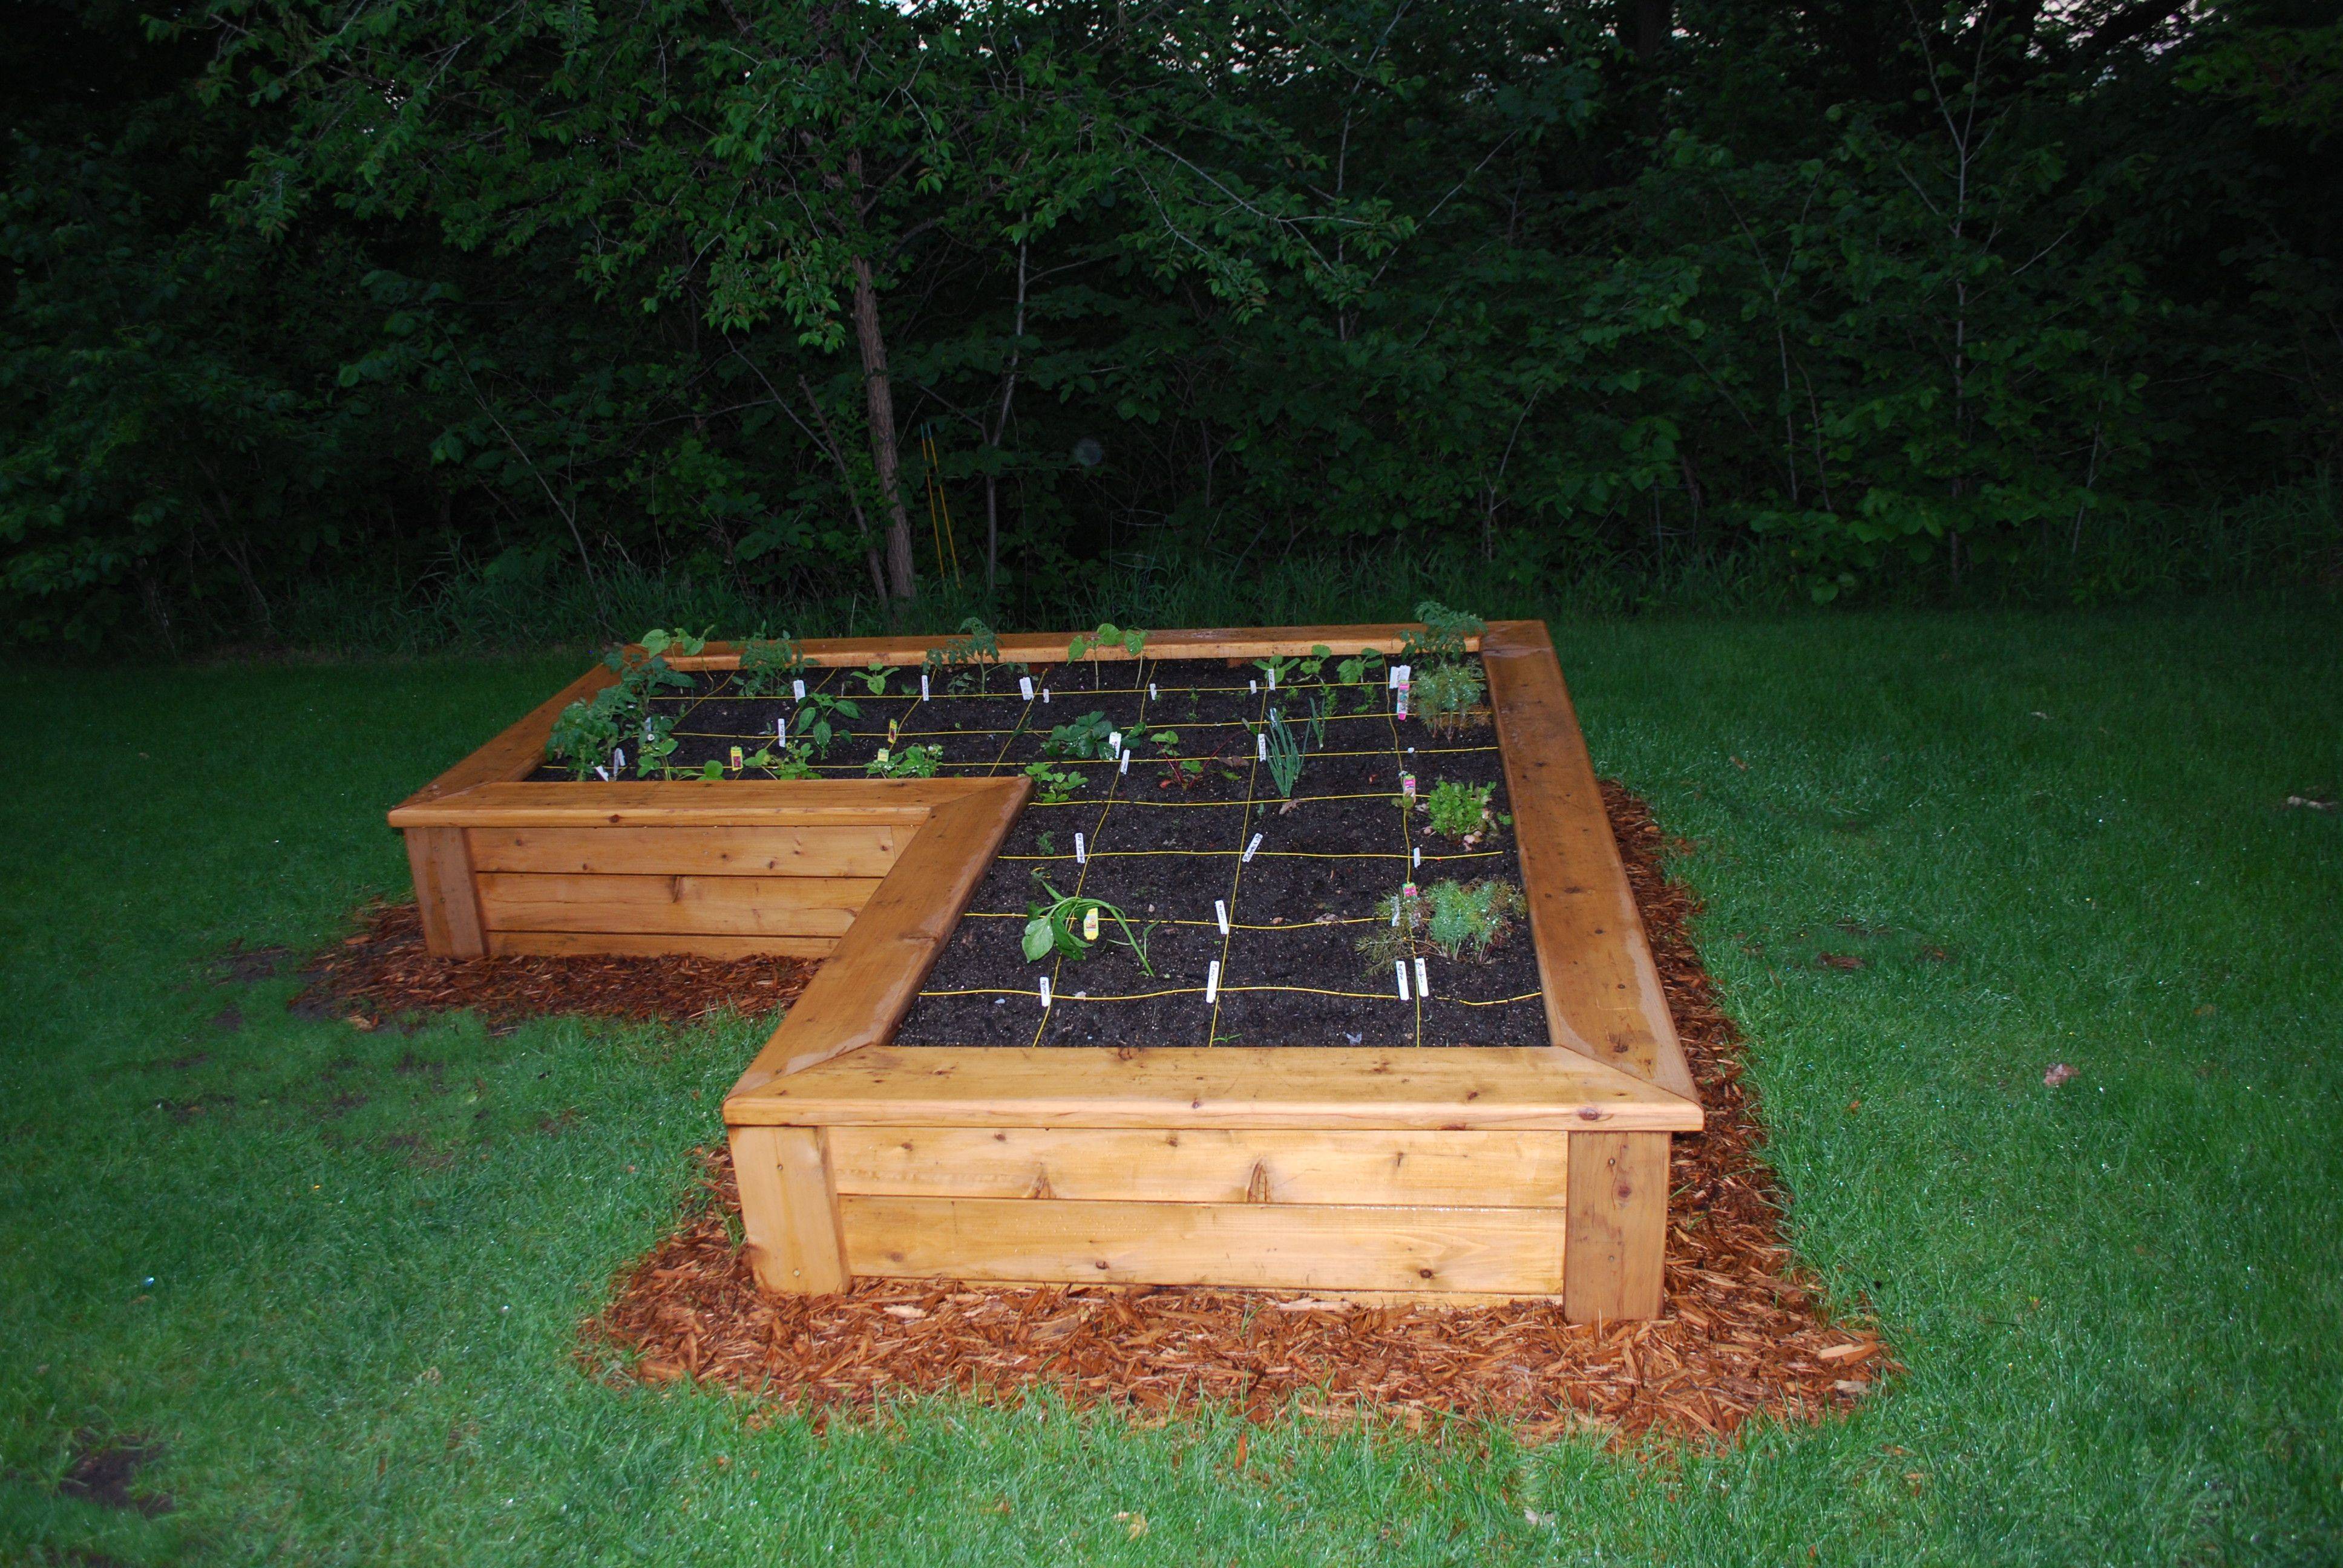 The Square Foot Garden Project